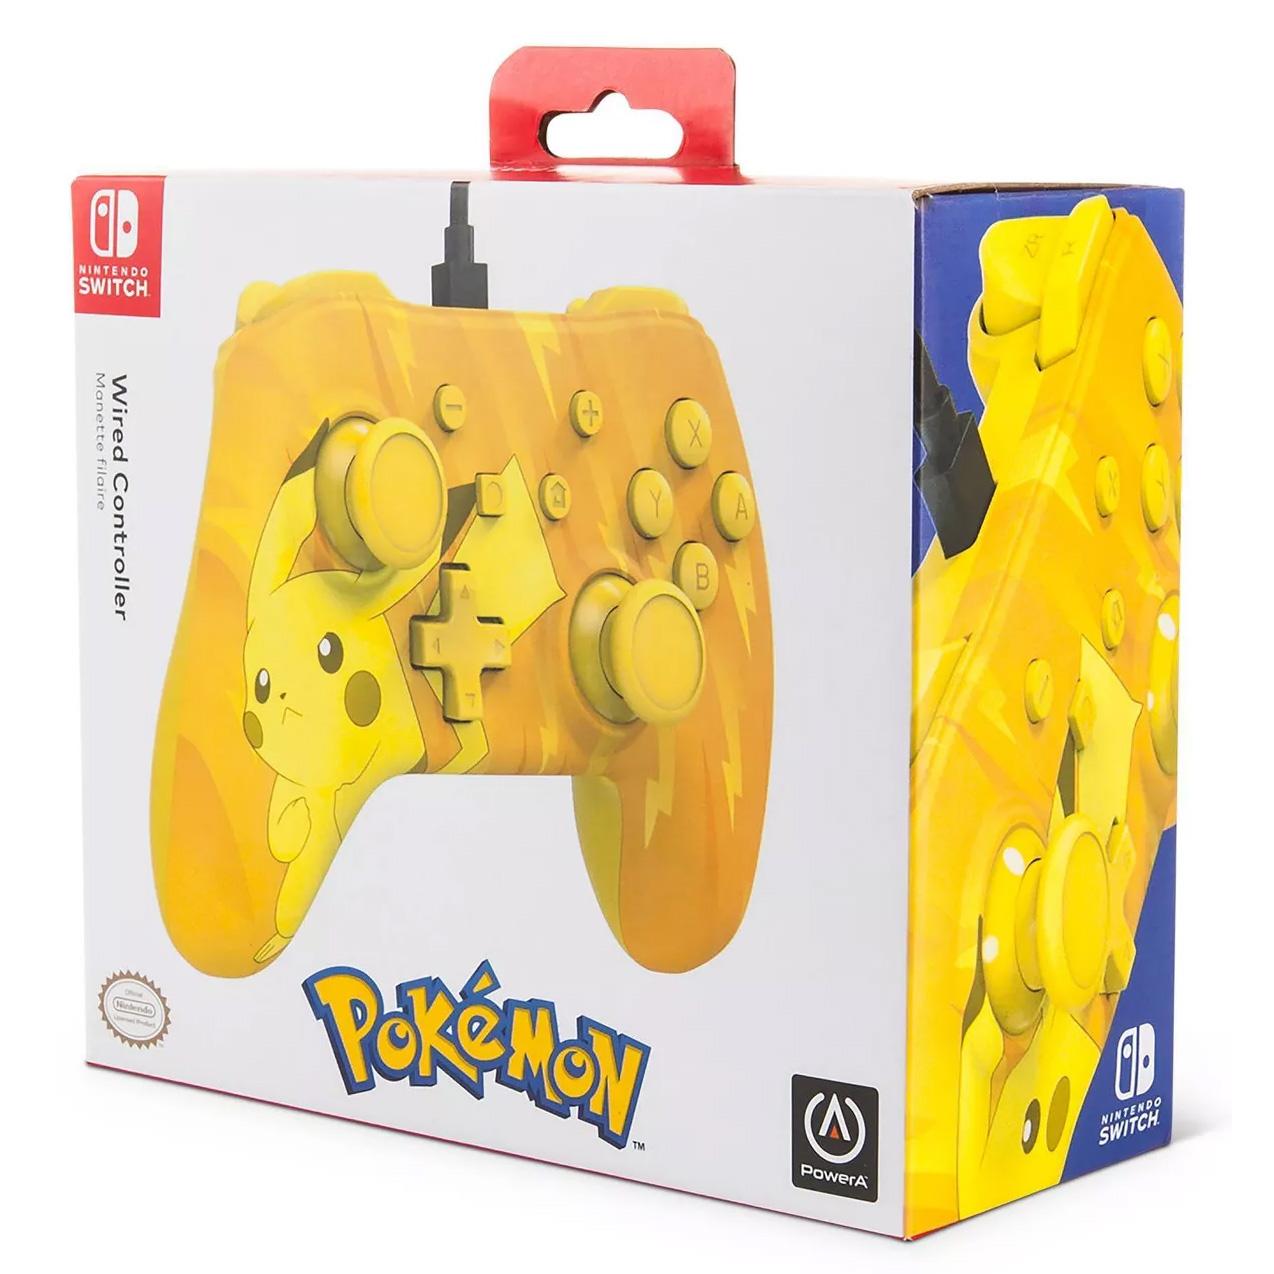 PowerA Pokemon Wired Controller for Nintendo Switch for $9.99